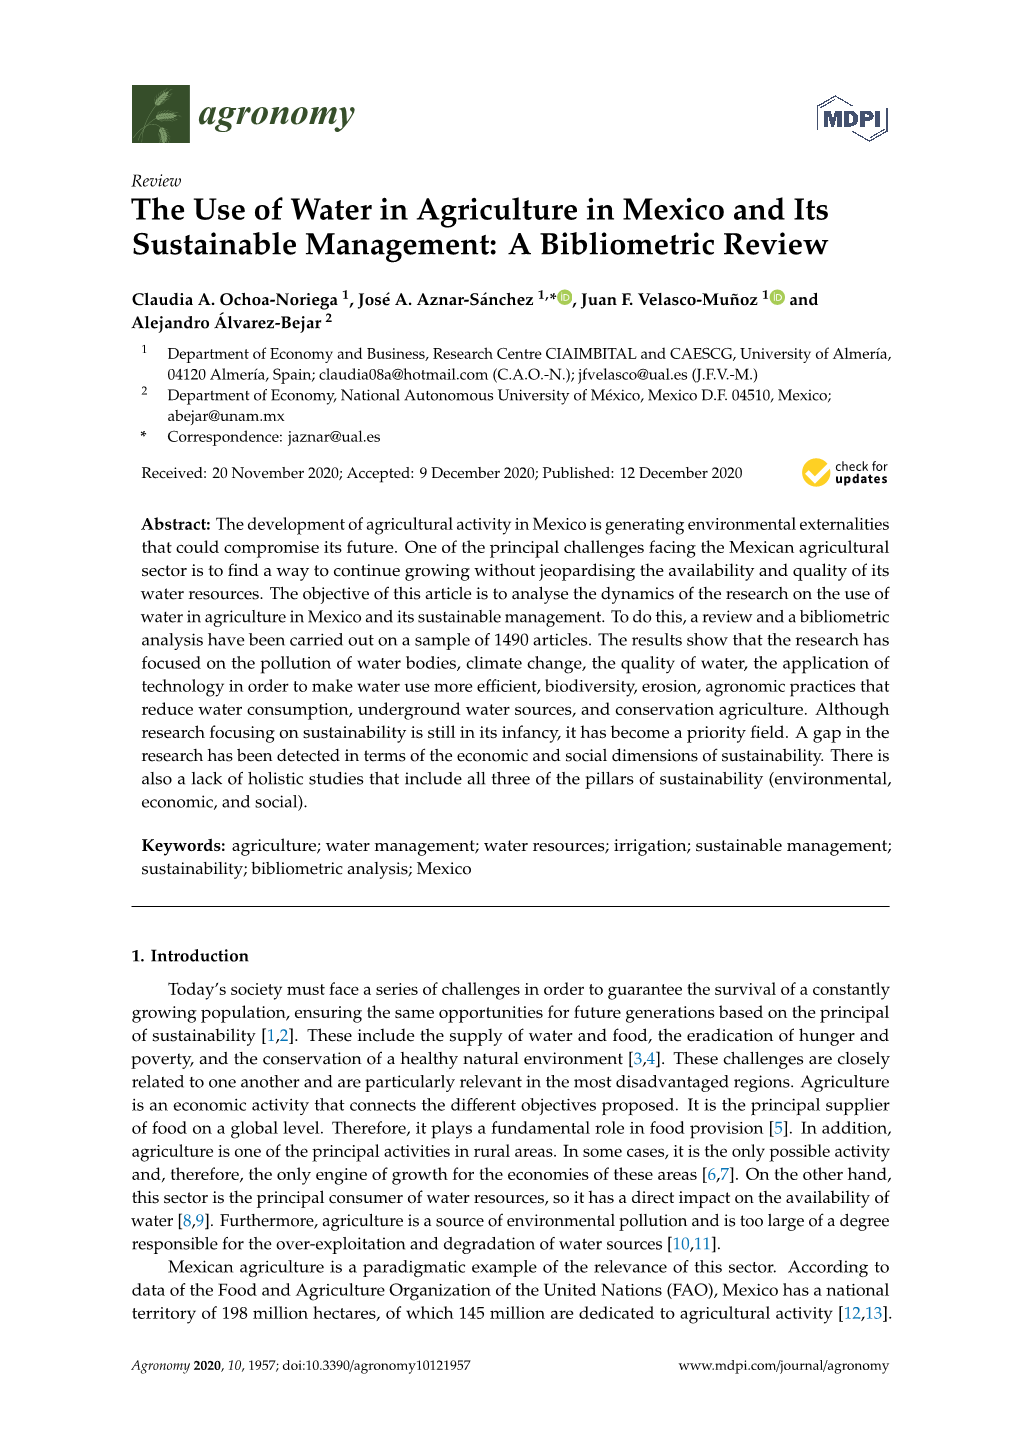 The Use of Water in Agriculture in Mexico and Its Sustainable Management: a Bibliometric Review